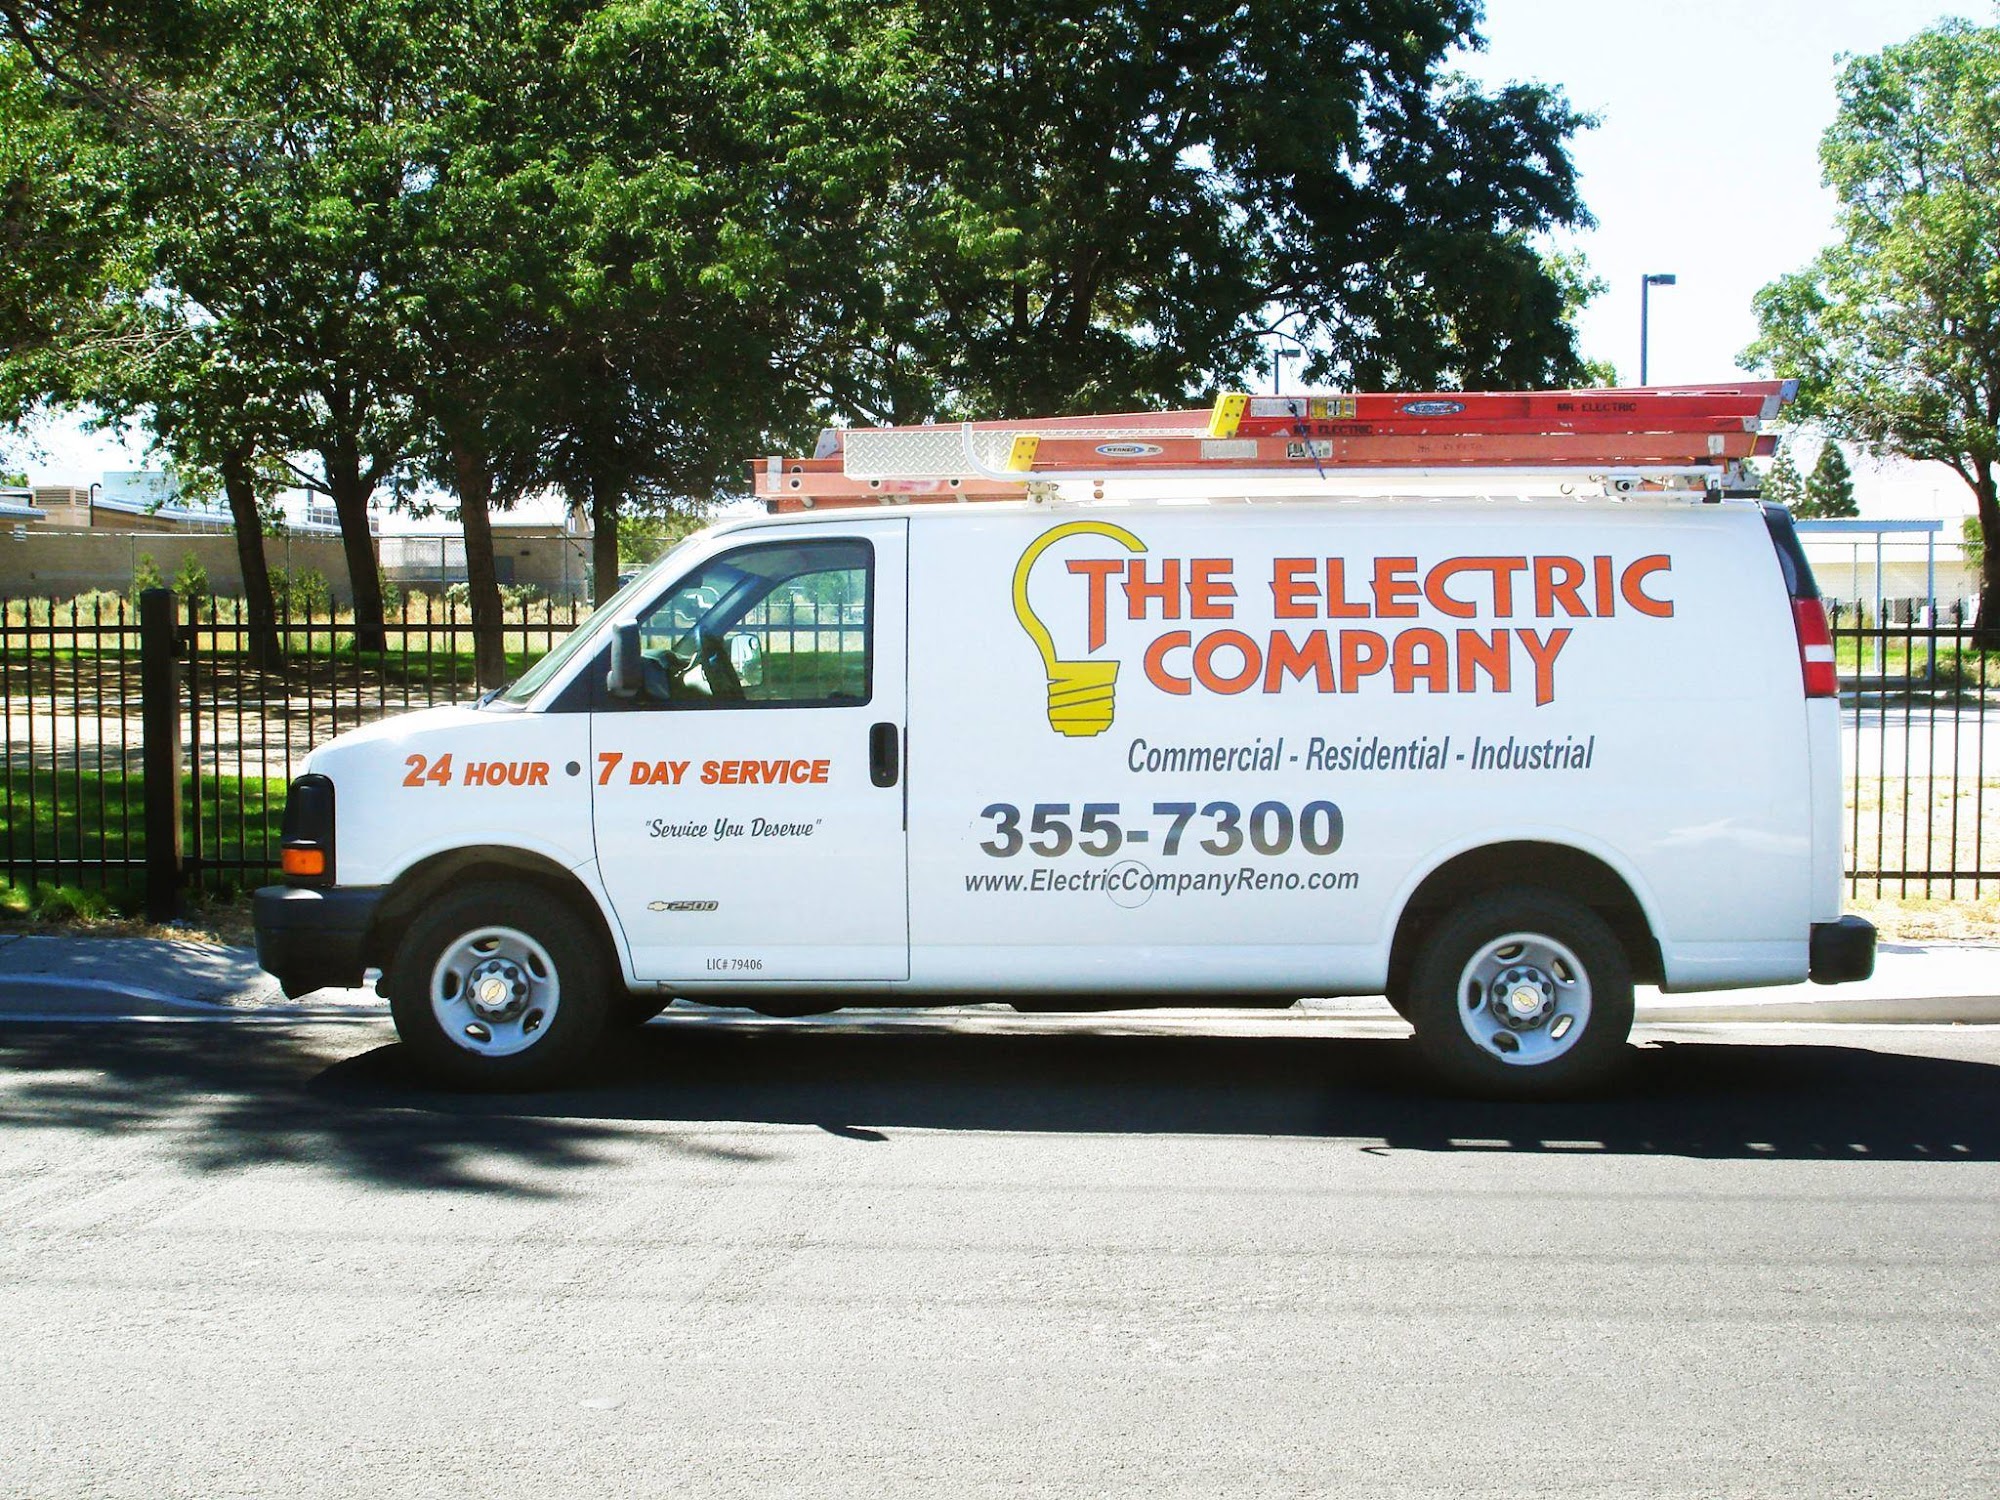 The Electric Company